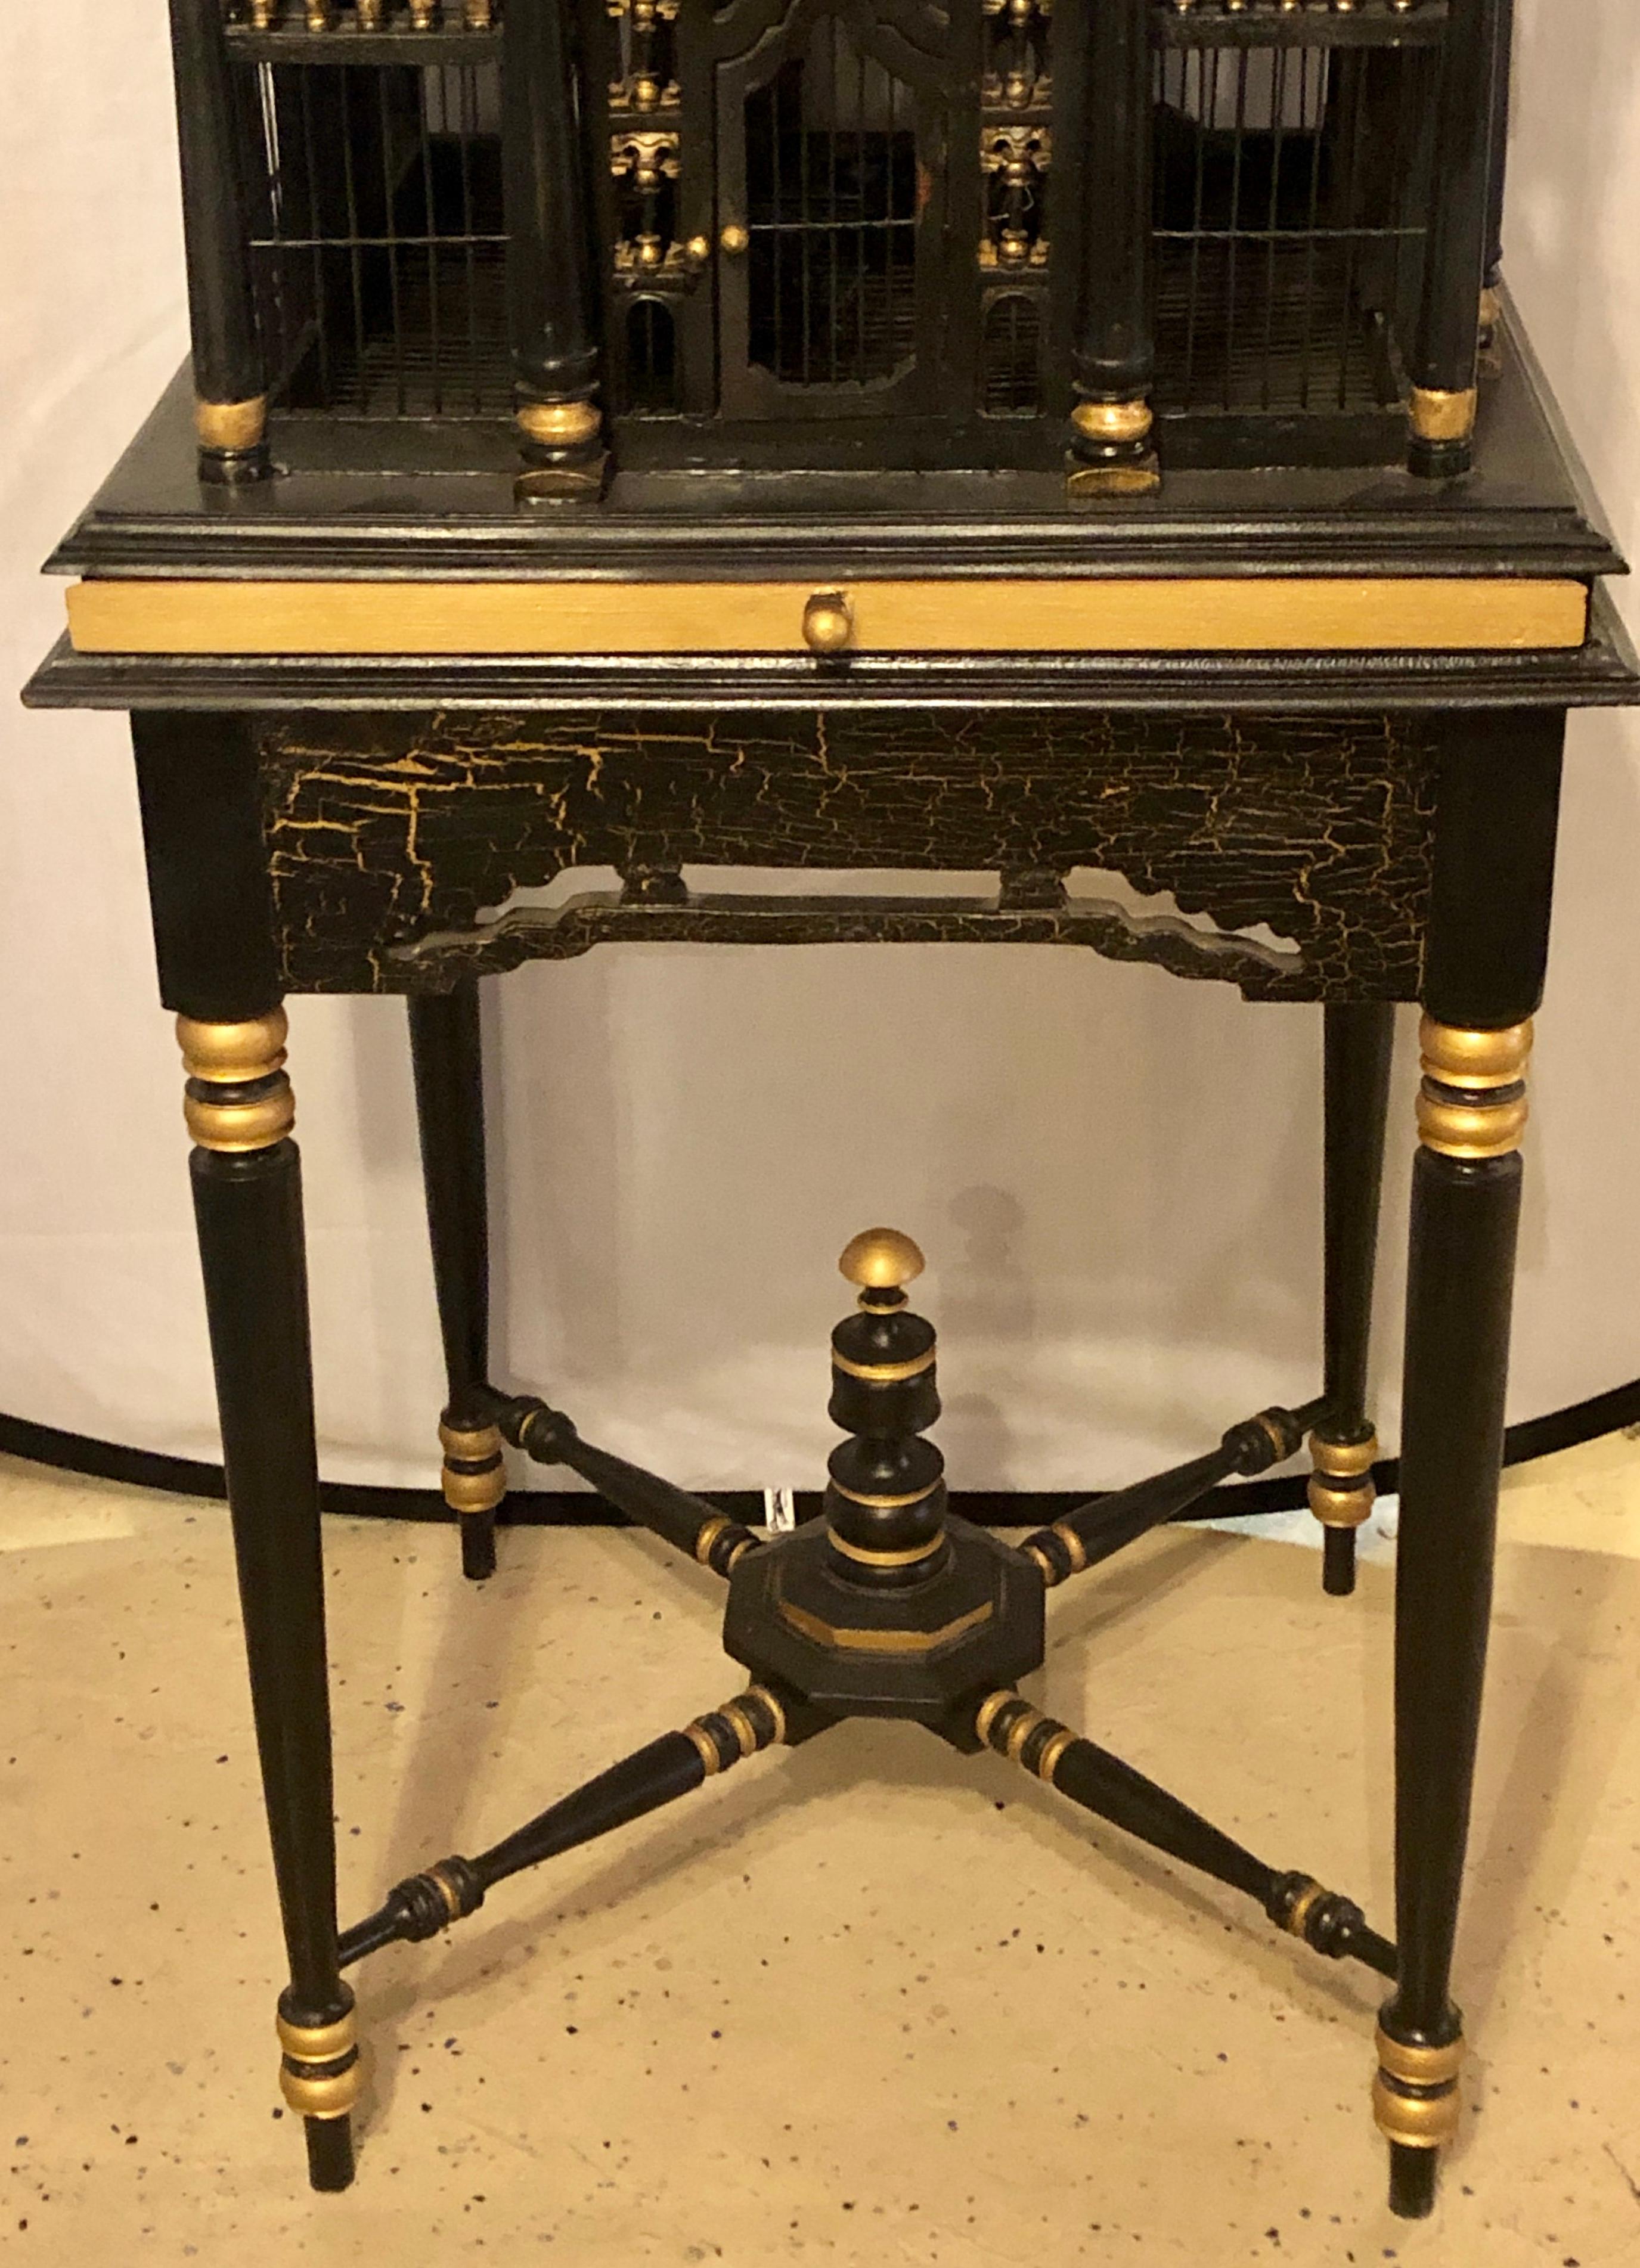 Early Victorian Victorian Ebony and Gilt Faux Marble Decorated Birdcage on a Stand